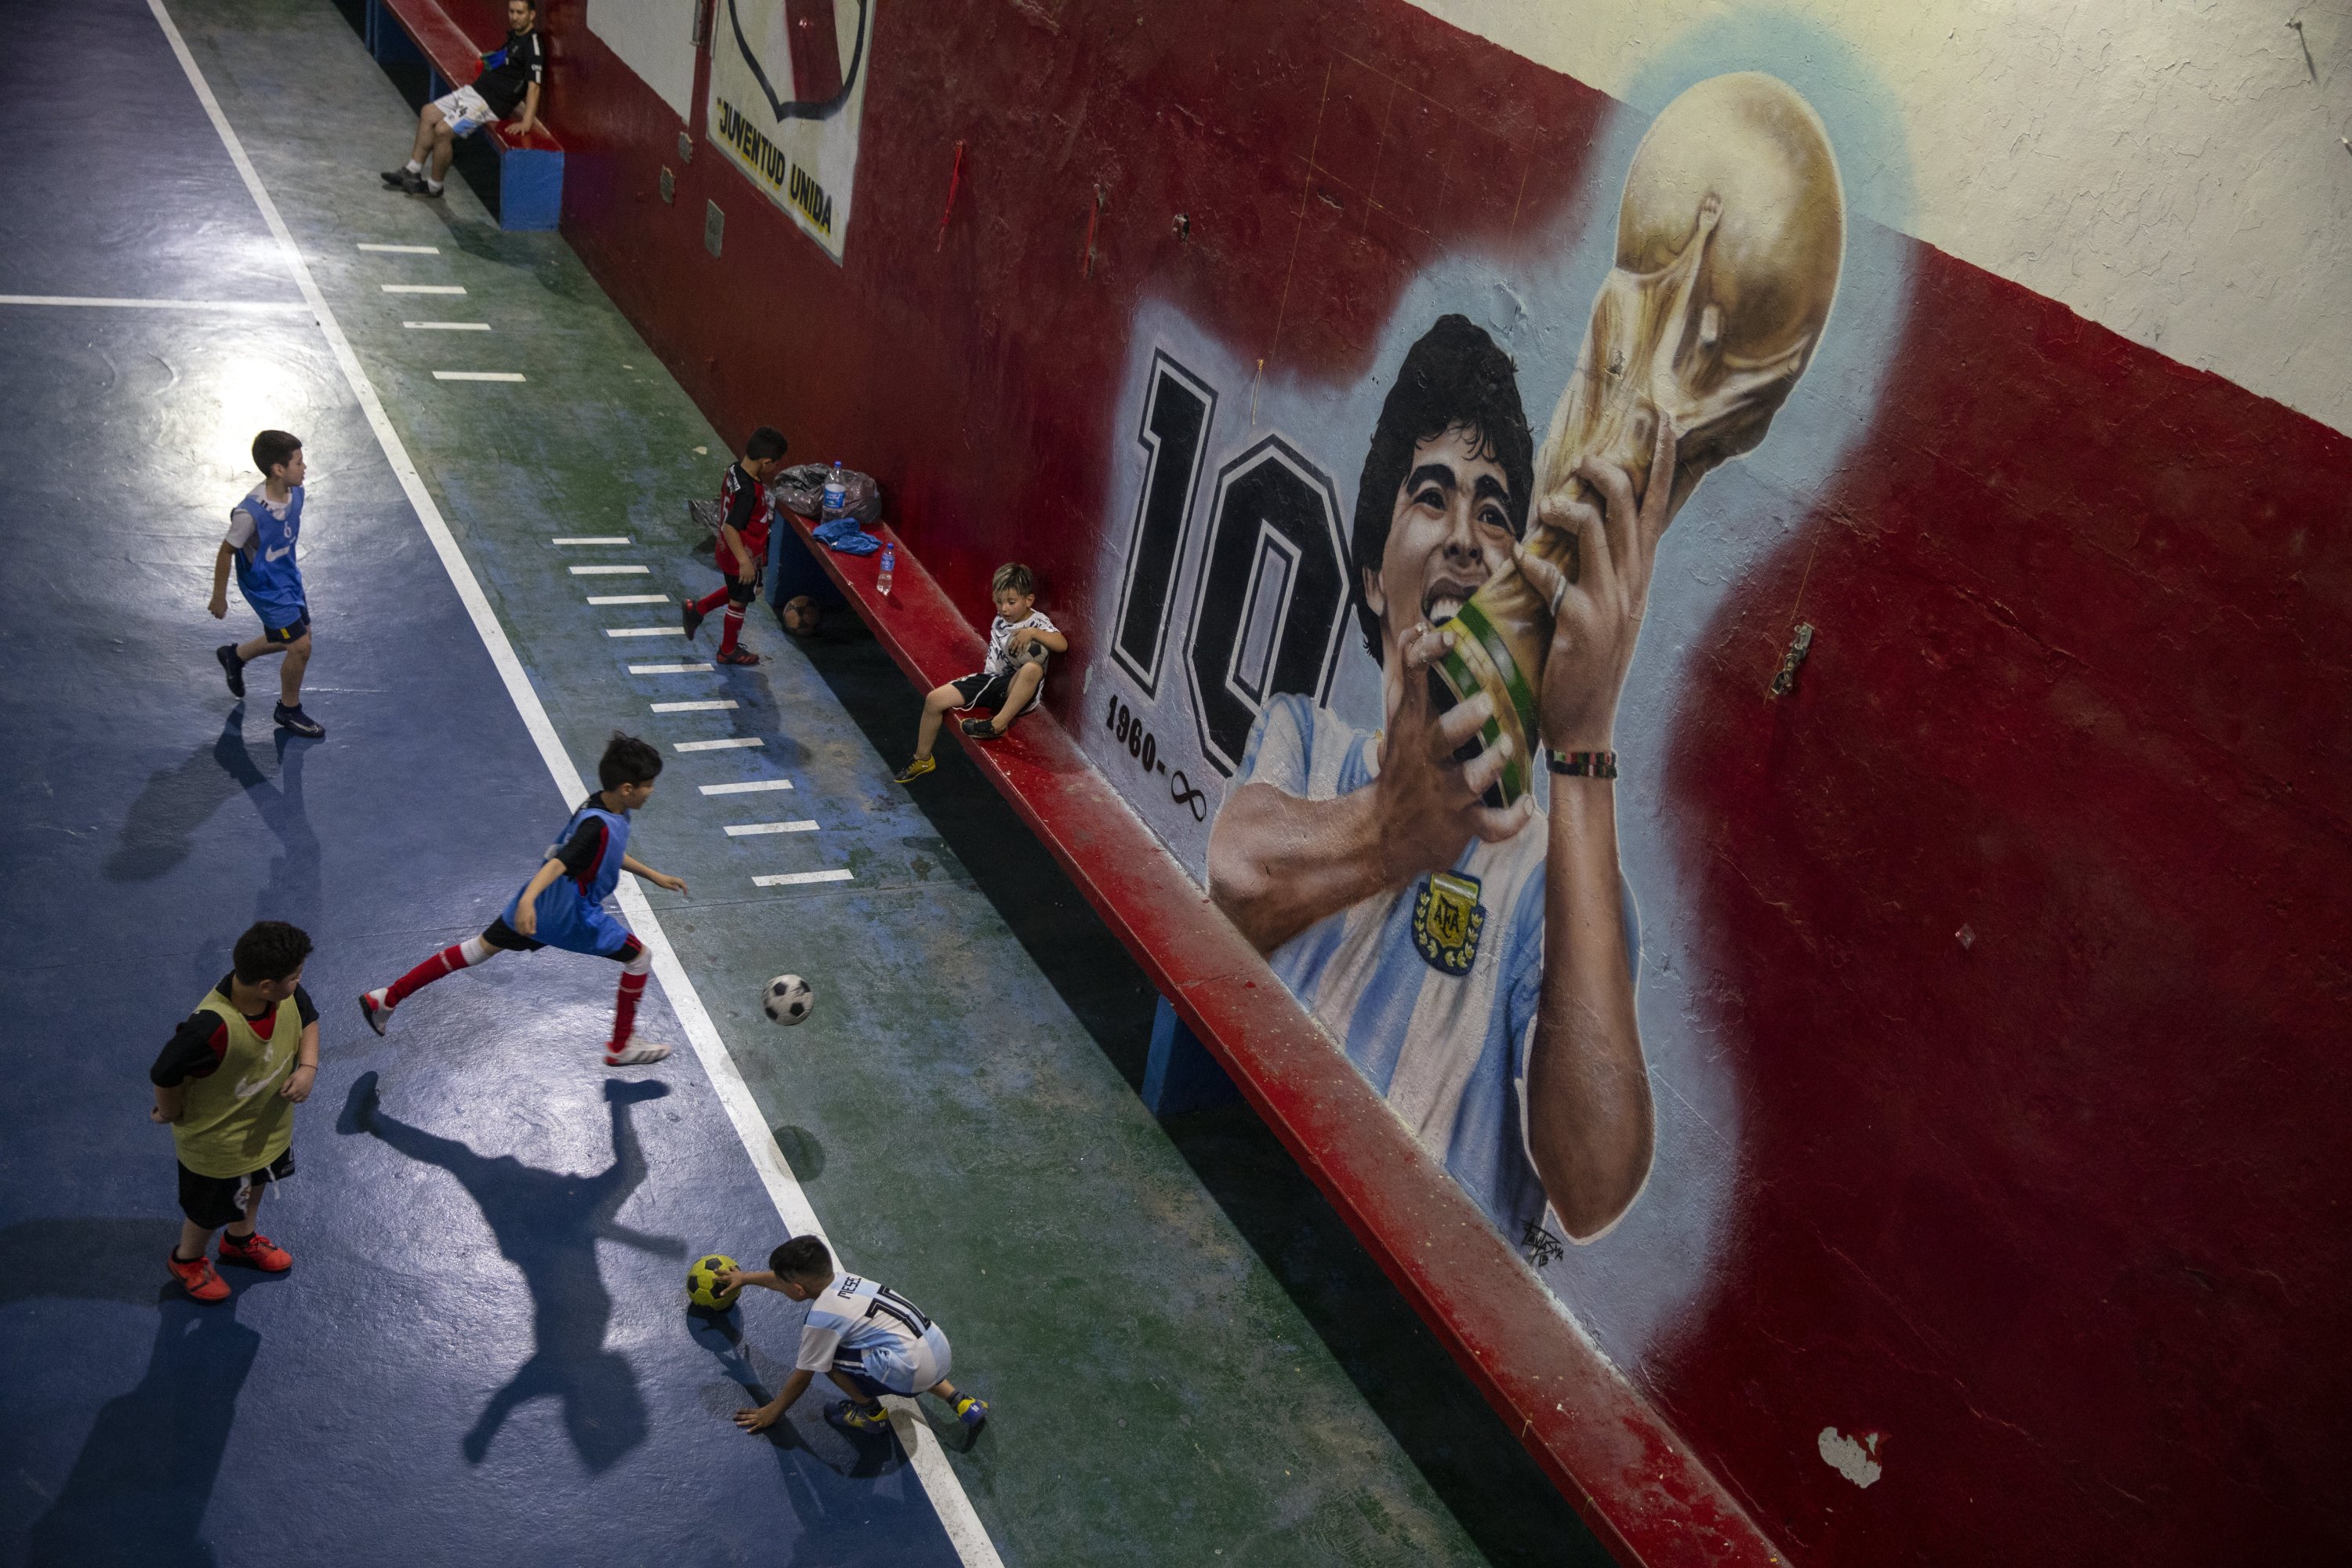 Children play football near a mural featuring the late football icon Diego Maradona in the 'Juventud Unida' club in Buenos Aires, Argentina, Nov. 24, 2021. (AP Photo)